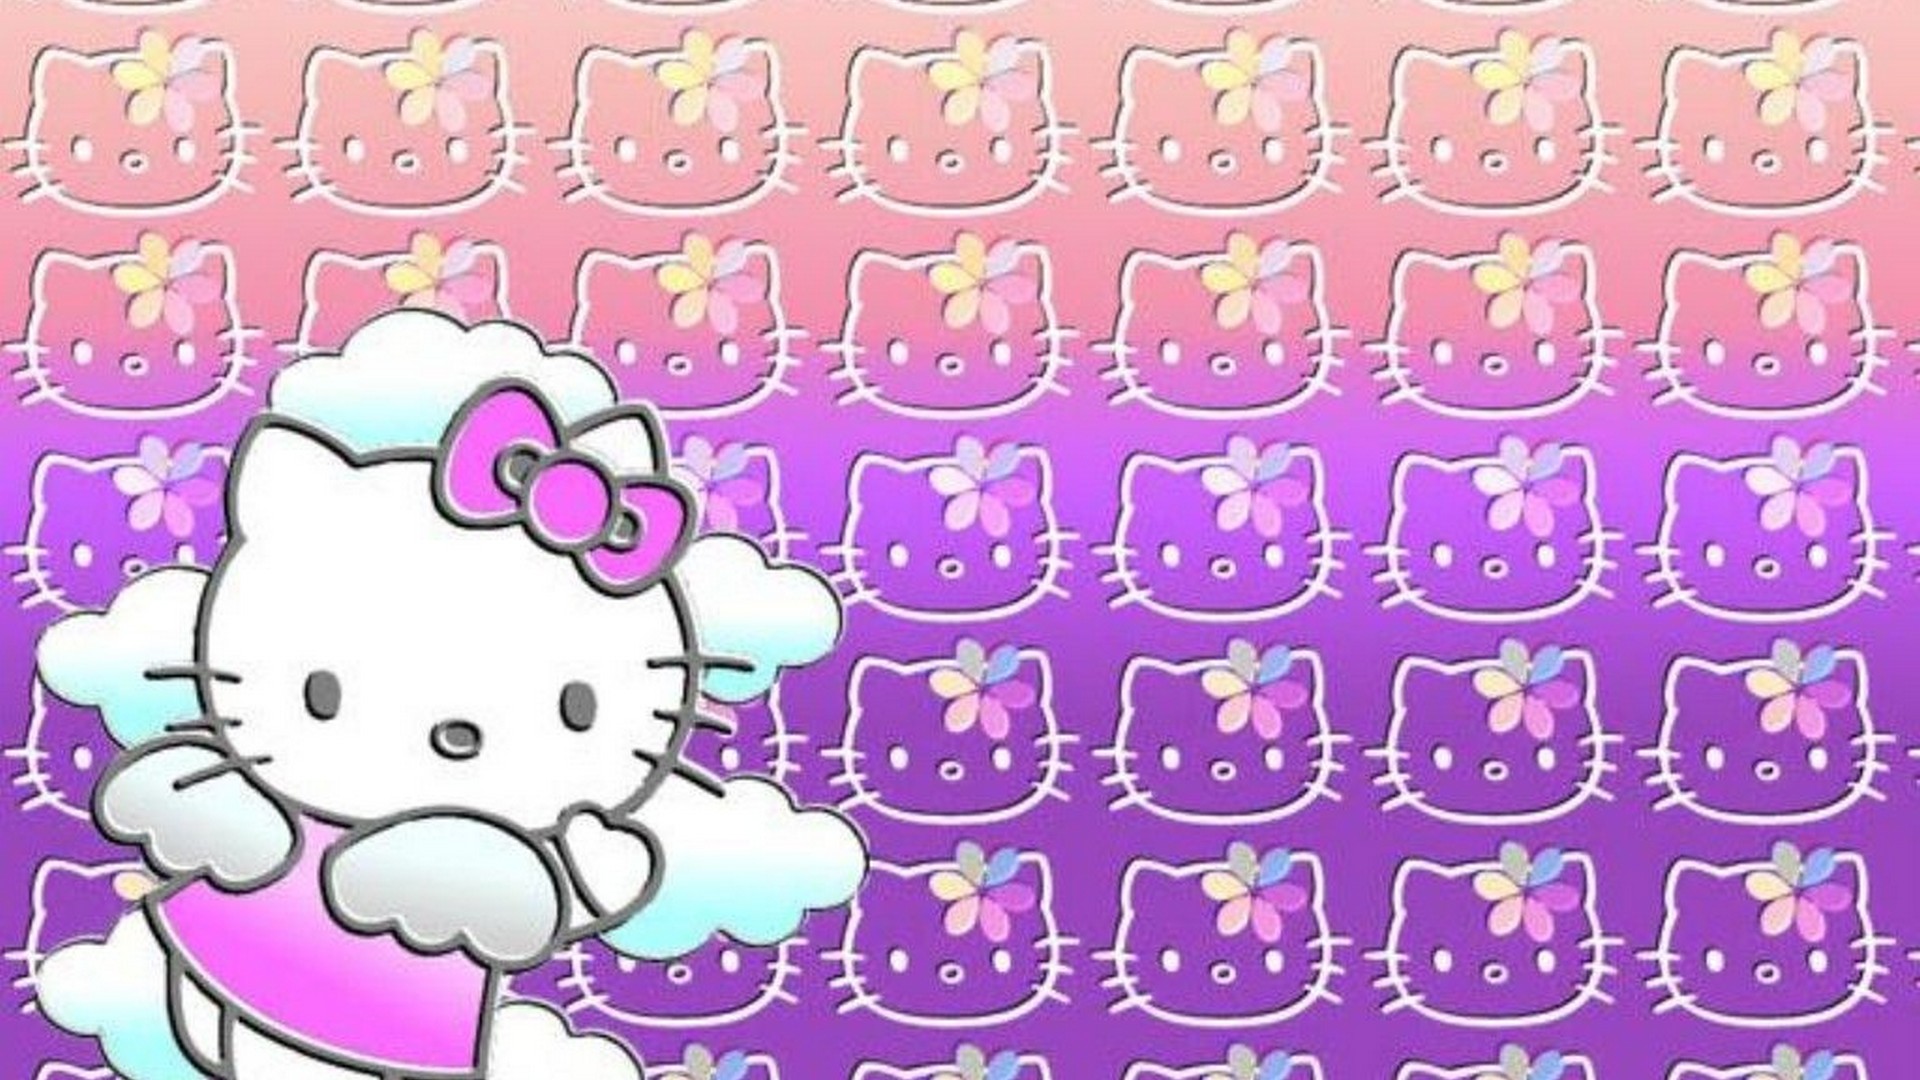 Sanrio Hello Kitty Desktop Wallpaper with image resolution 1920x1080 pixel. You can use this wallpaper as background for your desktop Computer Screensavers, Android or iPhone smartphones